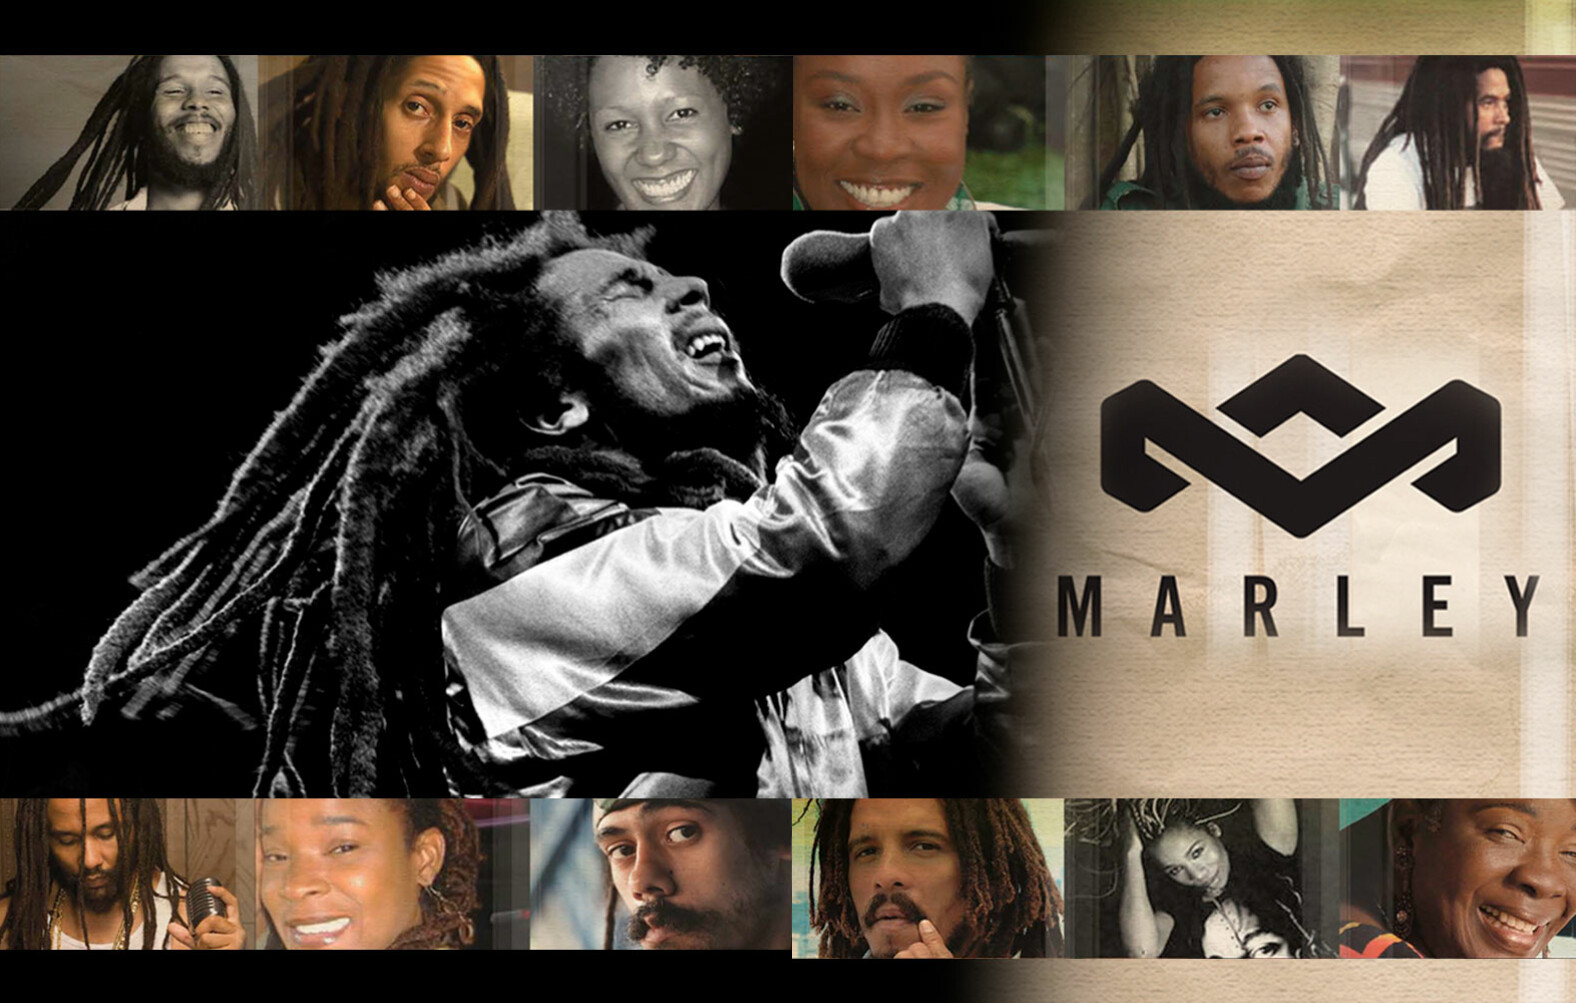 An image of Bob Marley and his children, paired with the House of Marley logo designed by Vs.